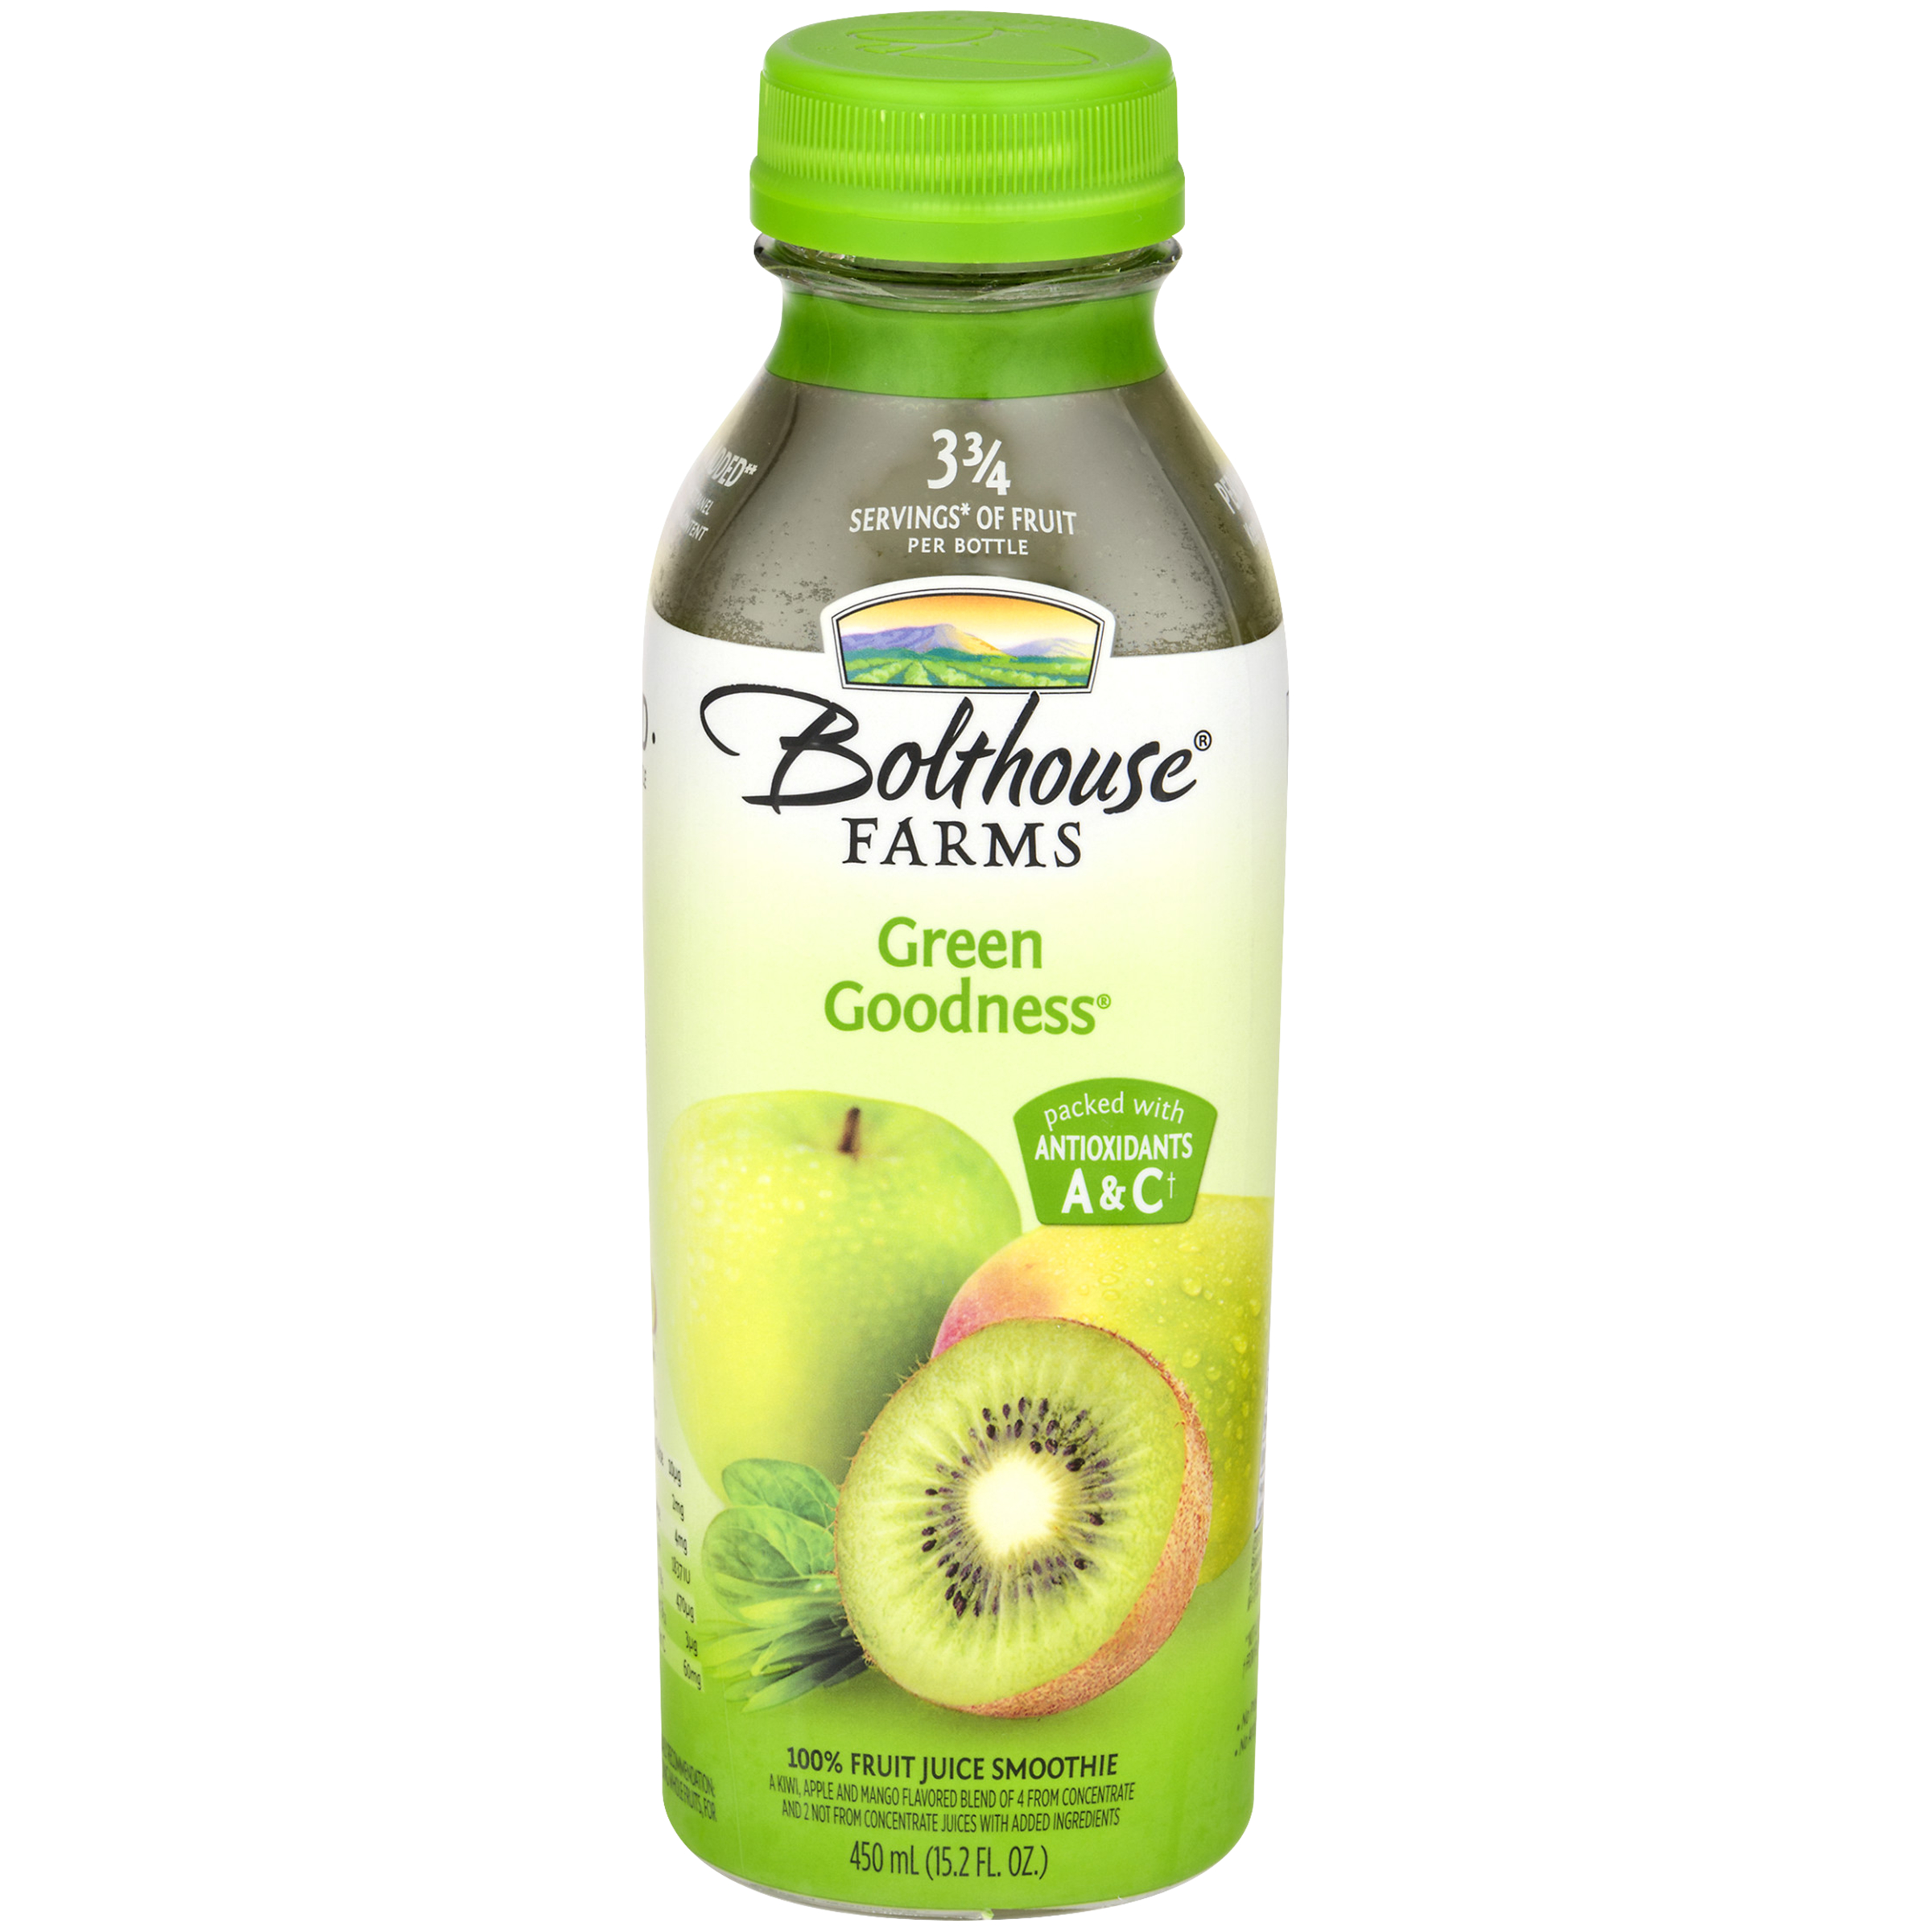 Bolthouse Farms Green Goodness 100% Fruit Juice Smoothie ...